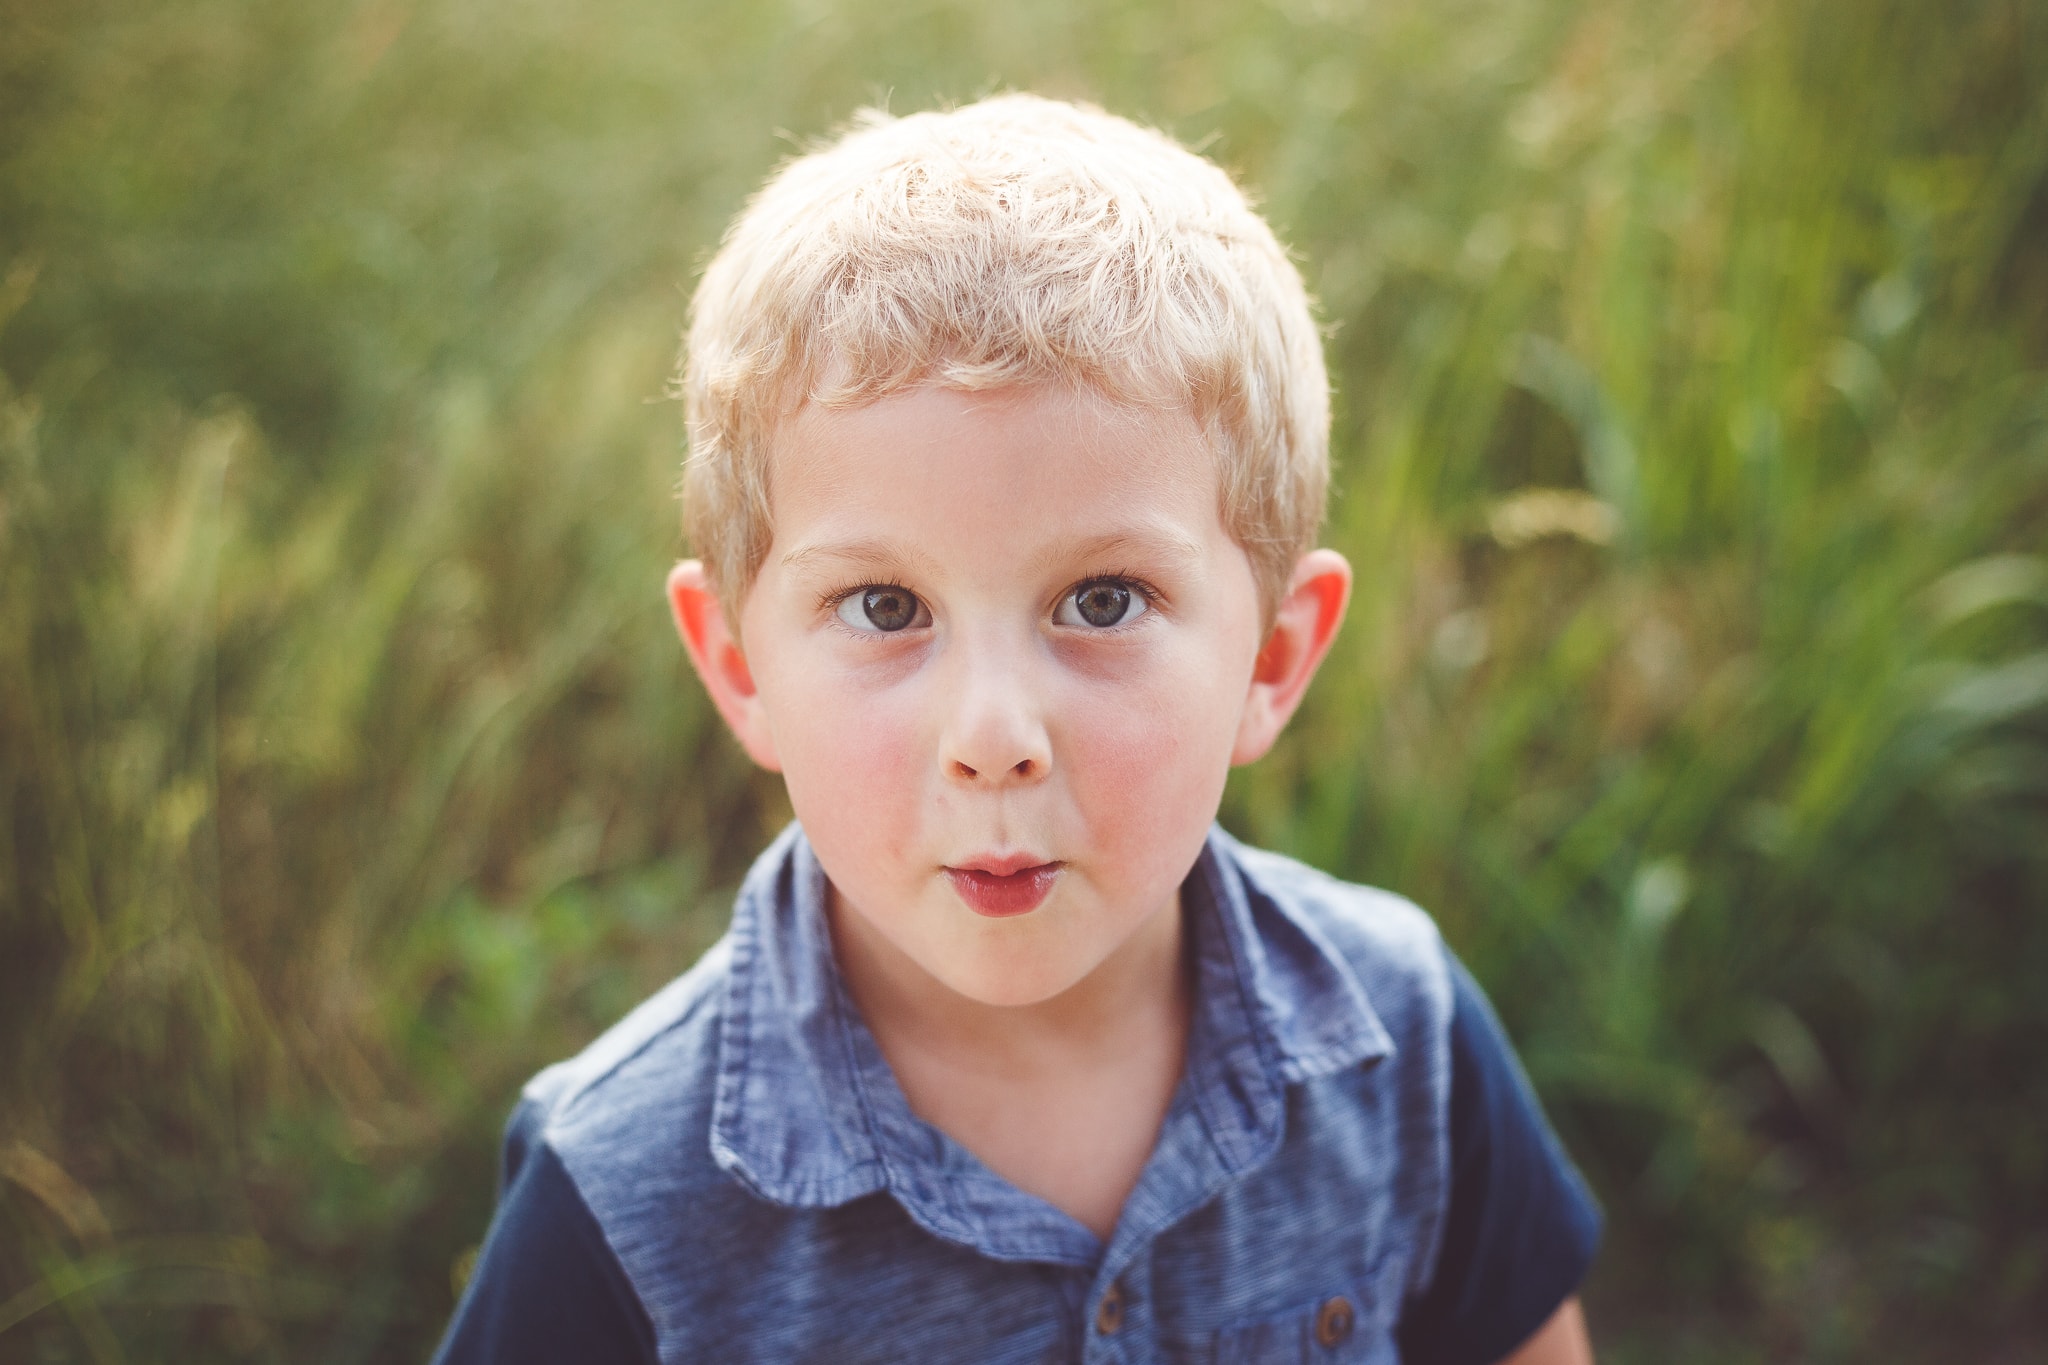 A young boy makes a playful face for the camera - Child Photography Session by L+R Photography - Tulsa, Oklahoma